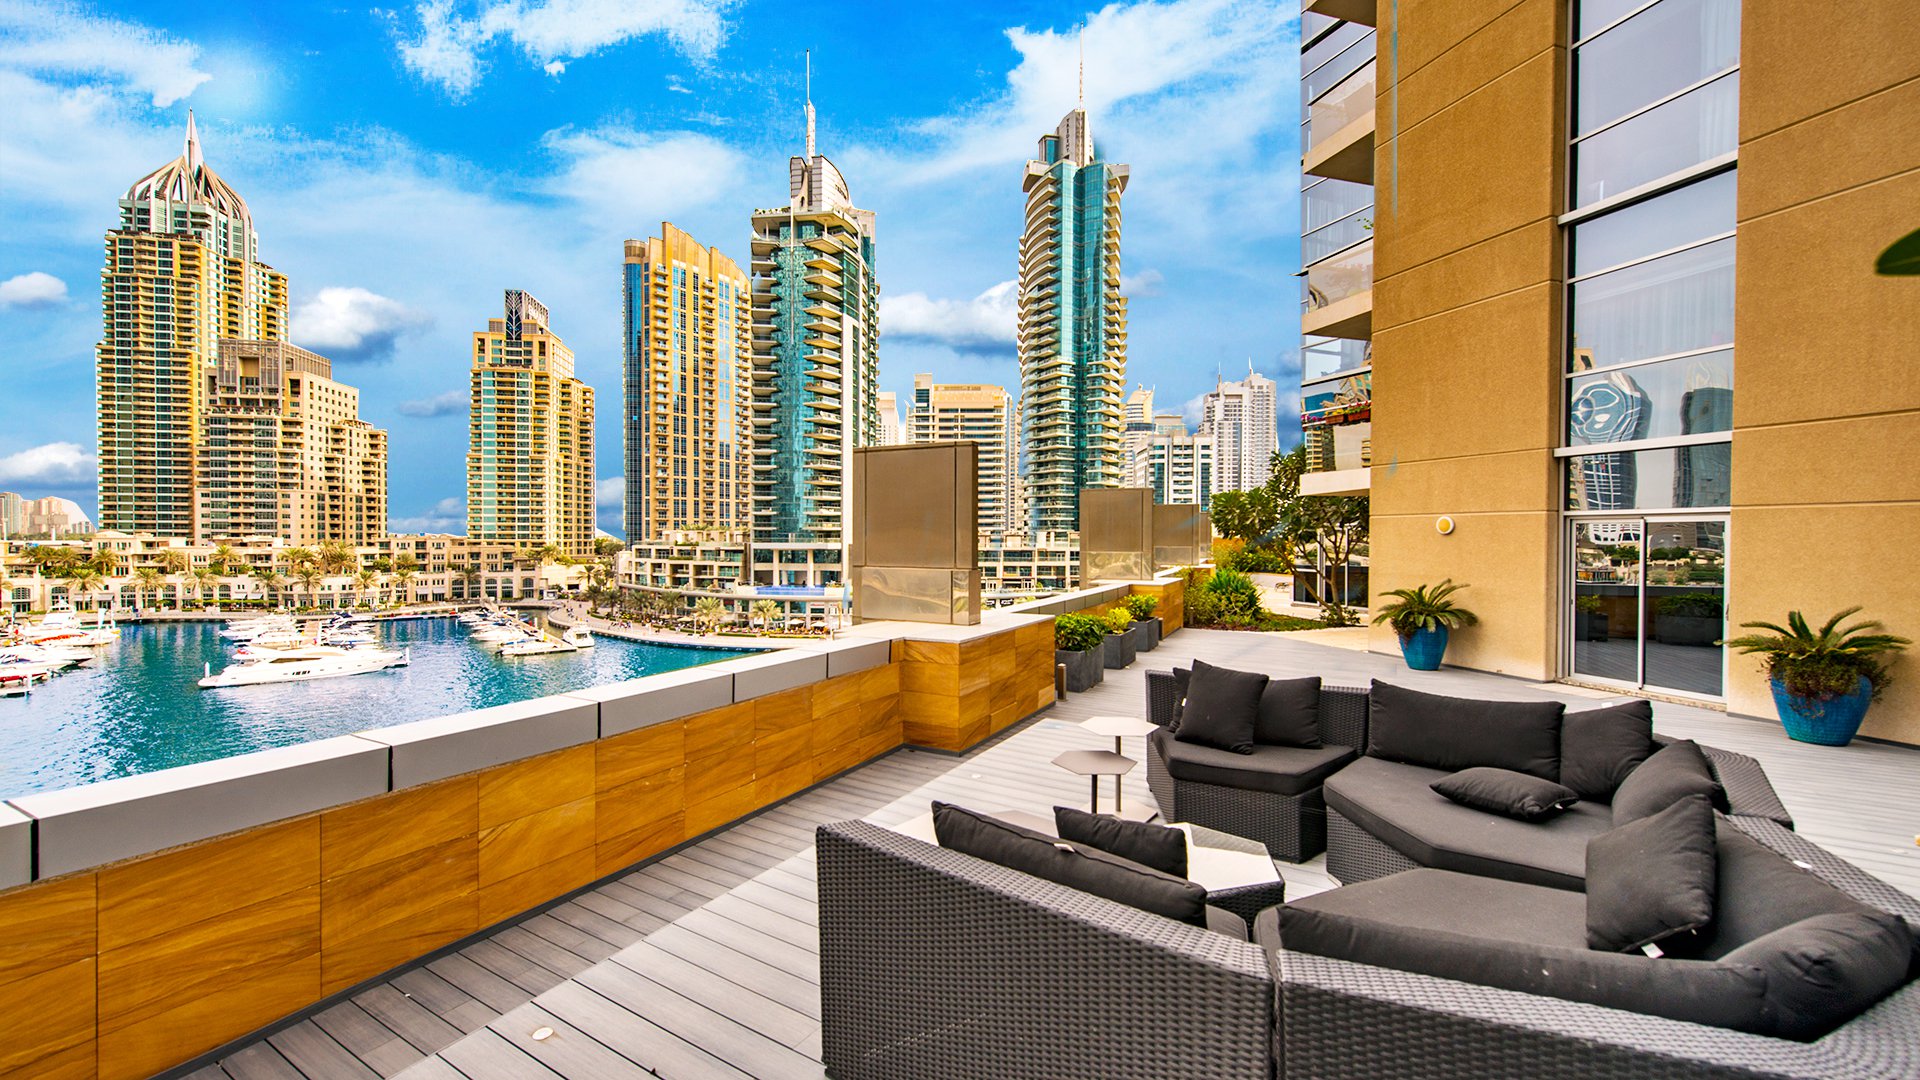 Apartments For Sale In Dubai Find Affordable Flats Or Luxury Homes